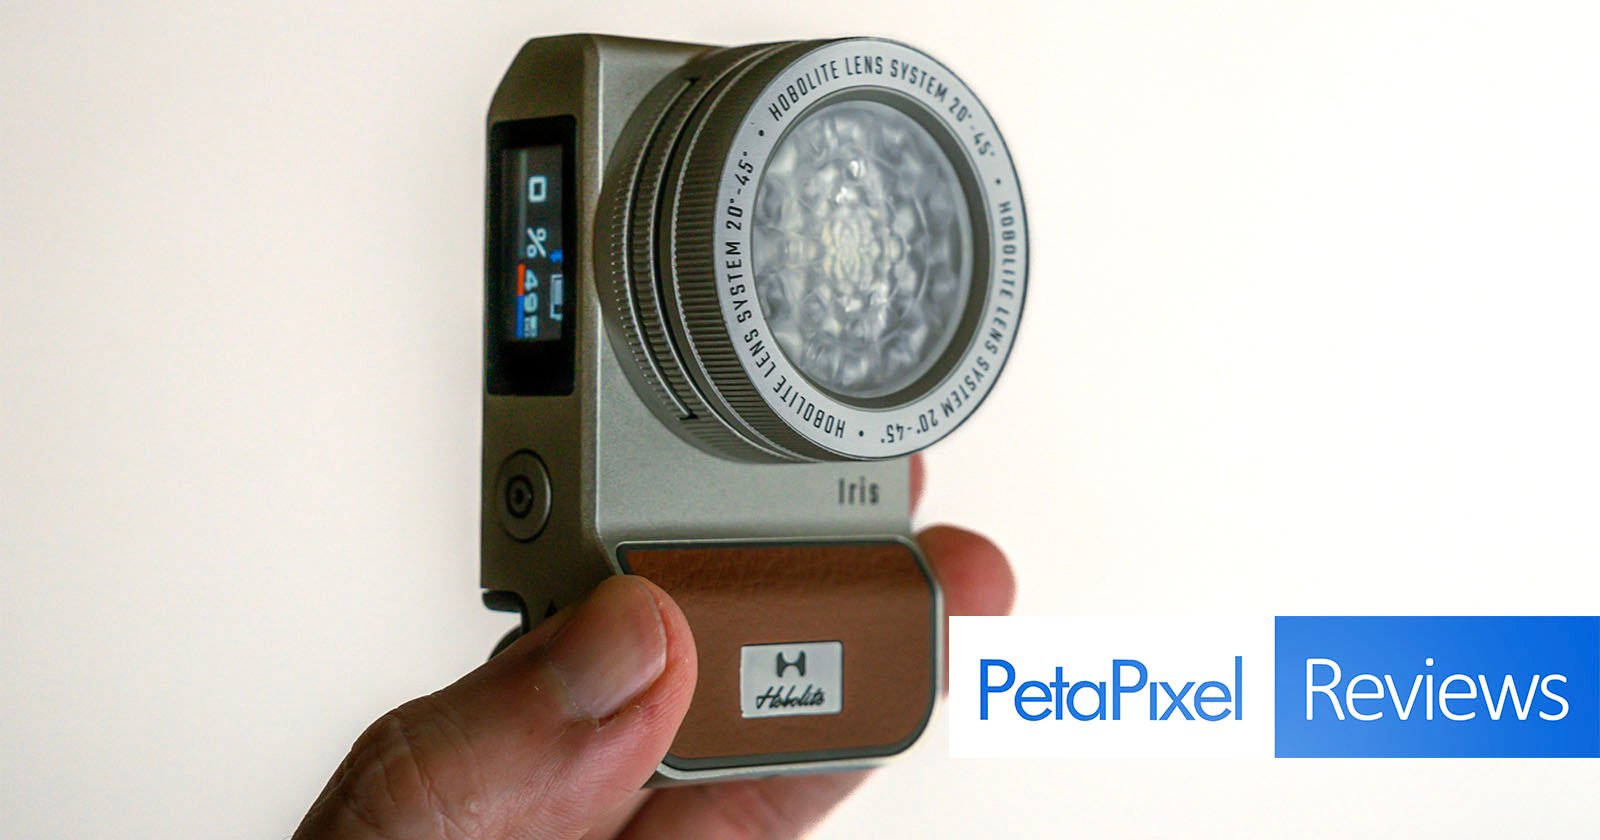 A hand holds an Iris Hobalux camera. The camera features a round Noblige Lens System and a small screen on the side. The bottom of the camera has a brown panel with the Hobalux logo. The text PetaPixel Reviews is overlaid in the lower right corner.